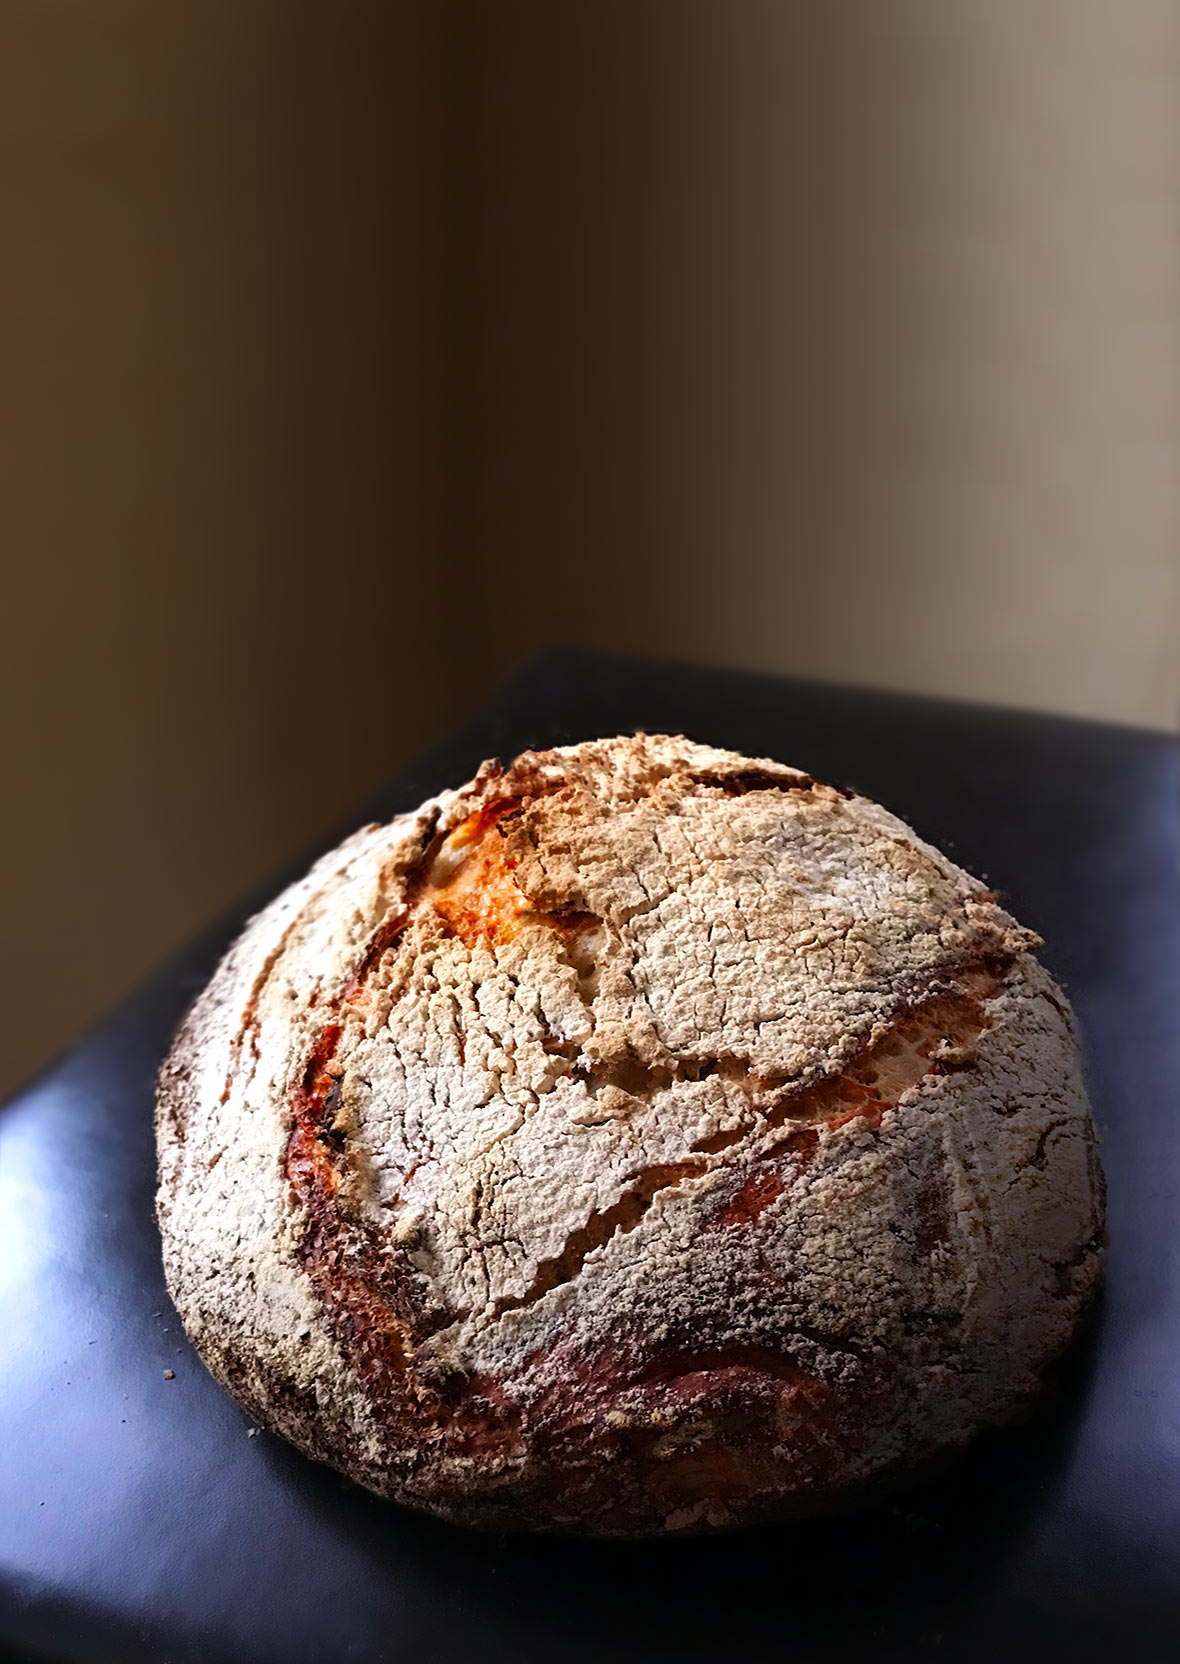 A round loaf of Jim Lahey's no-knead bread, dusted with flour on a leather chair